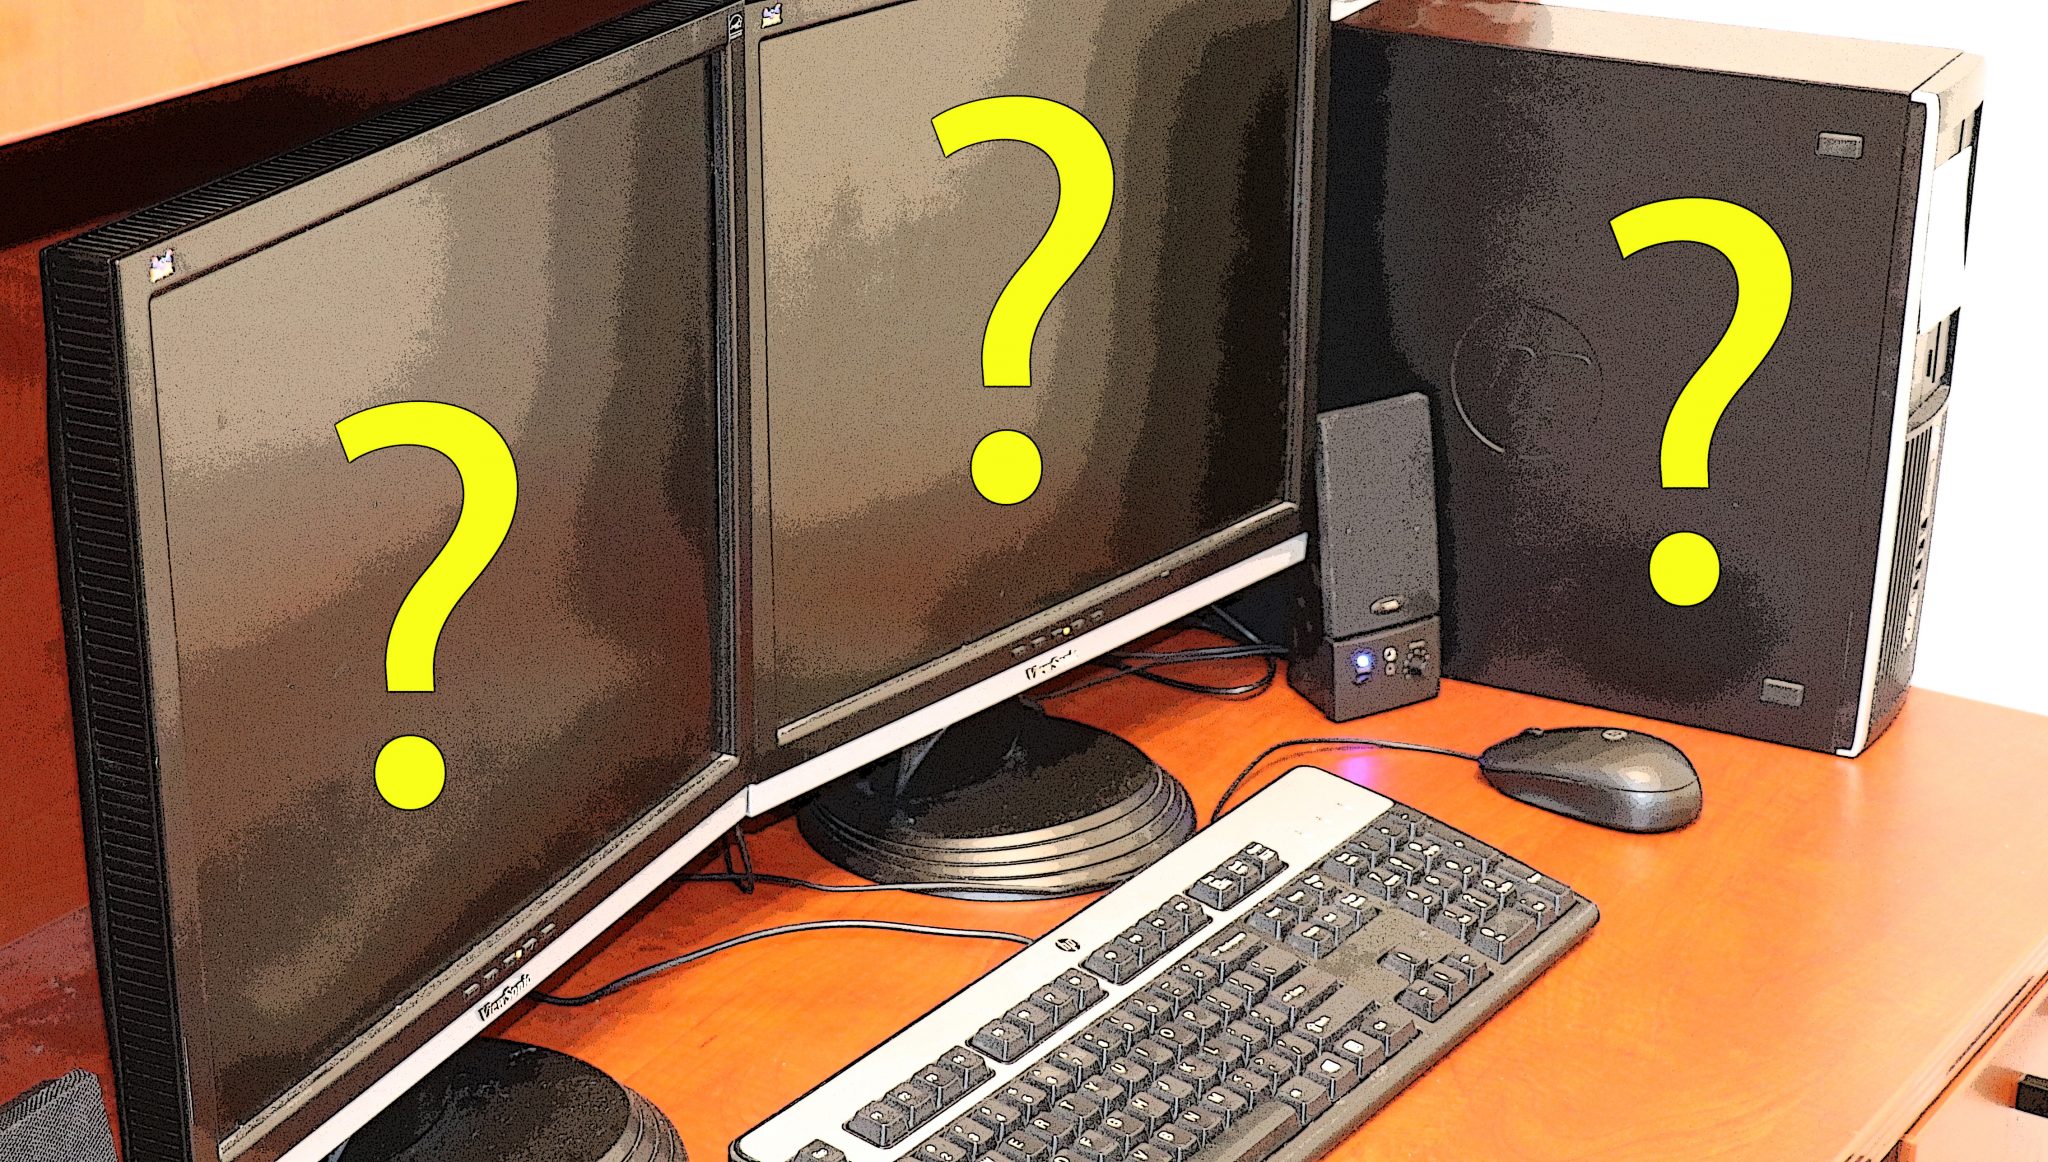 Image of a Computer on desk with questions marks